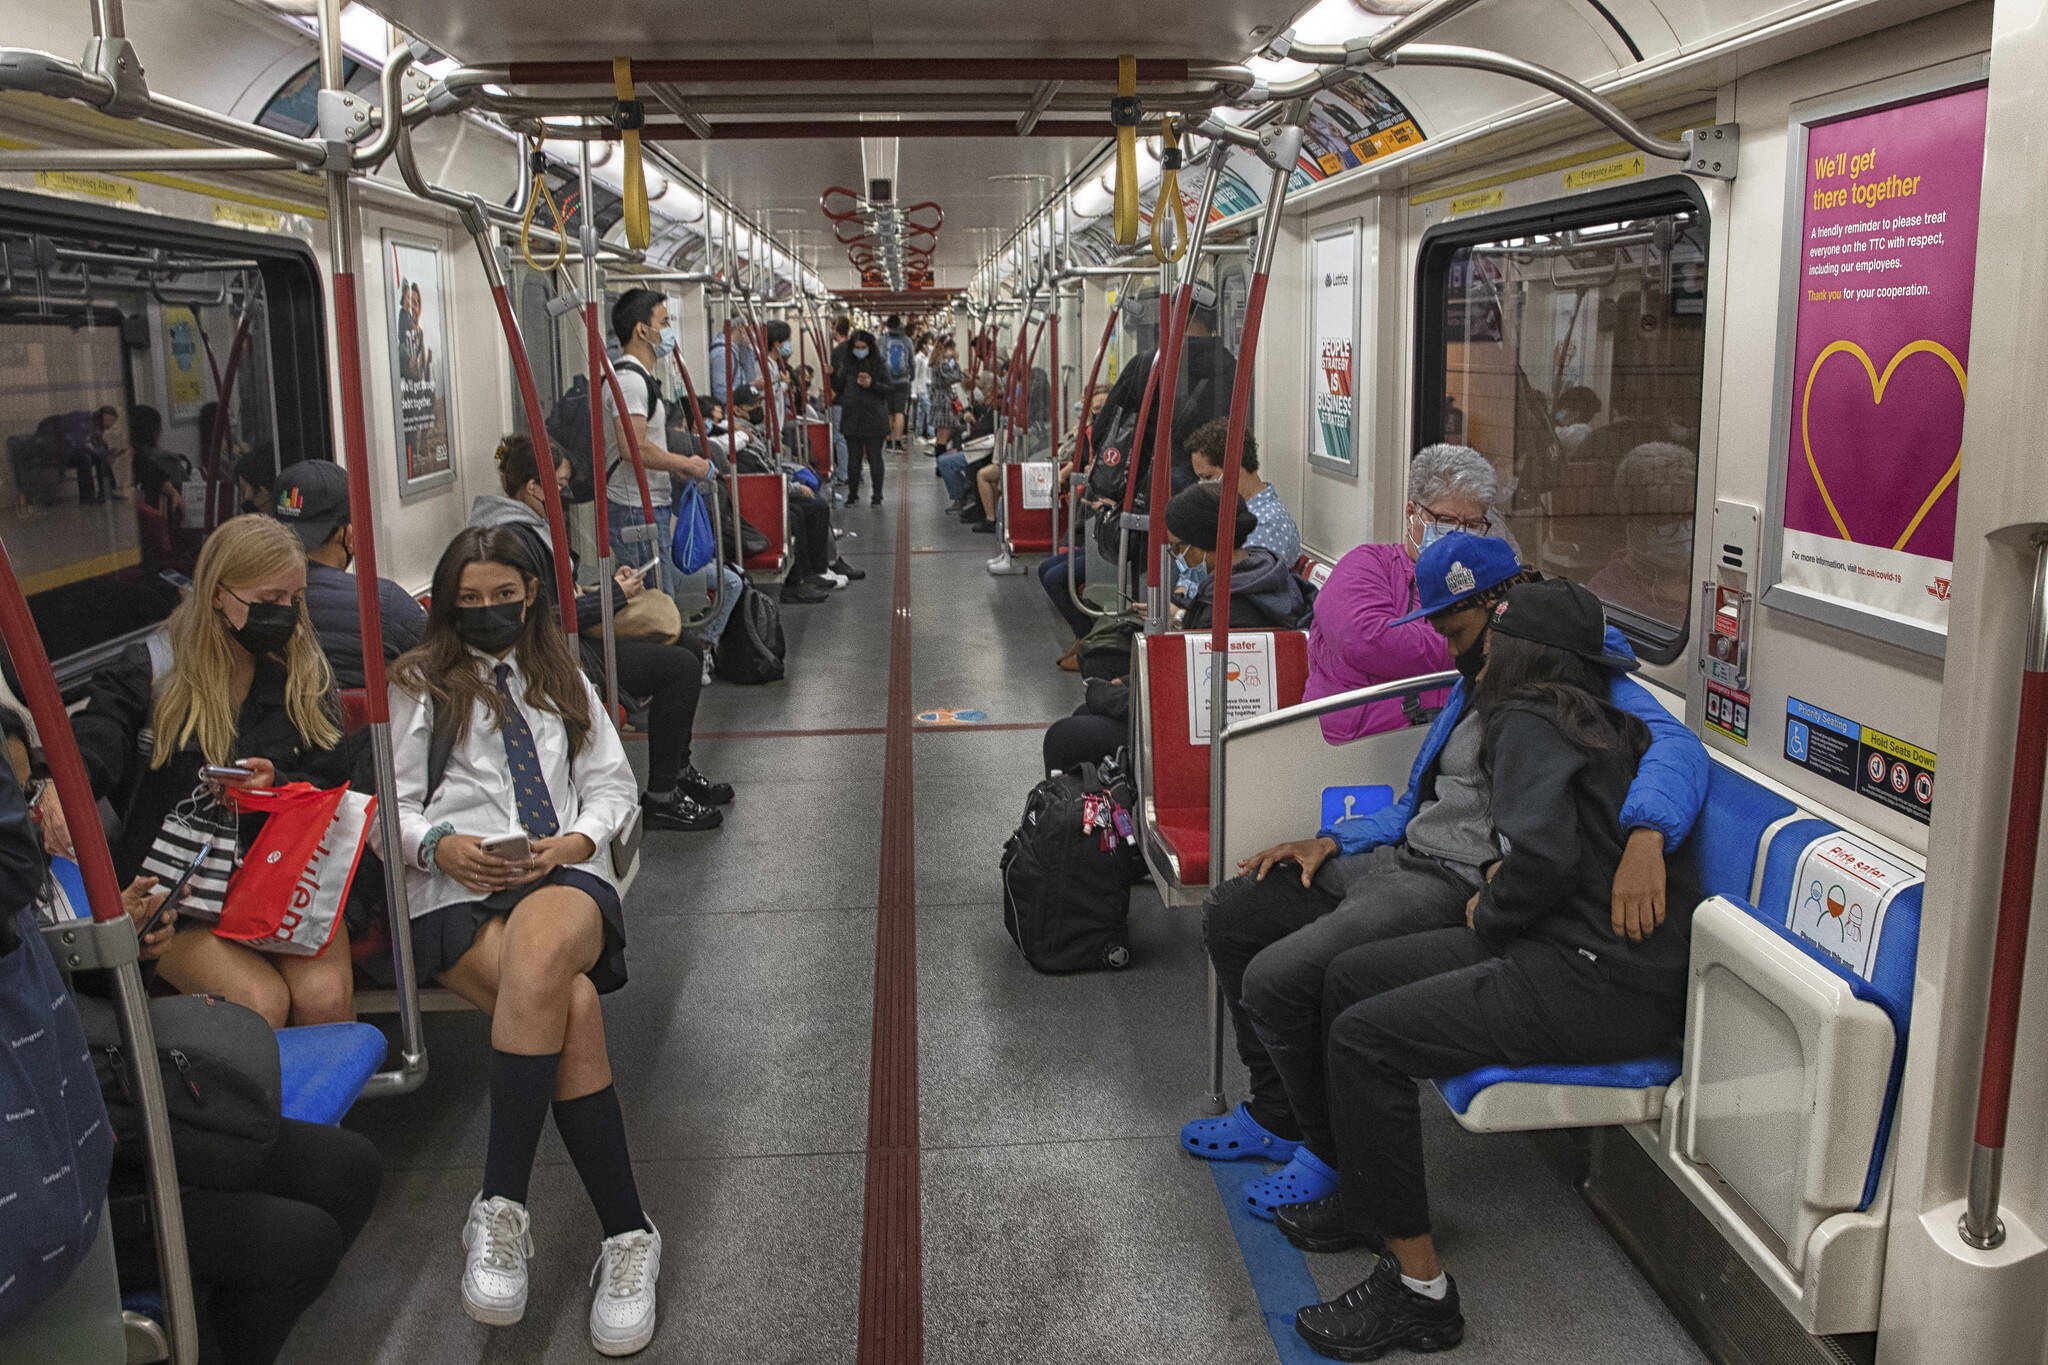 The TTC might actually eliminate monthly passes for good